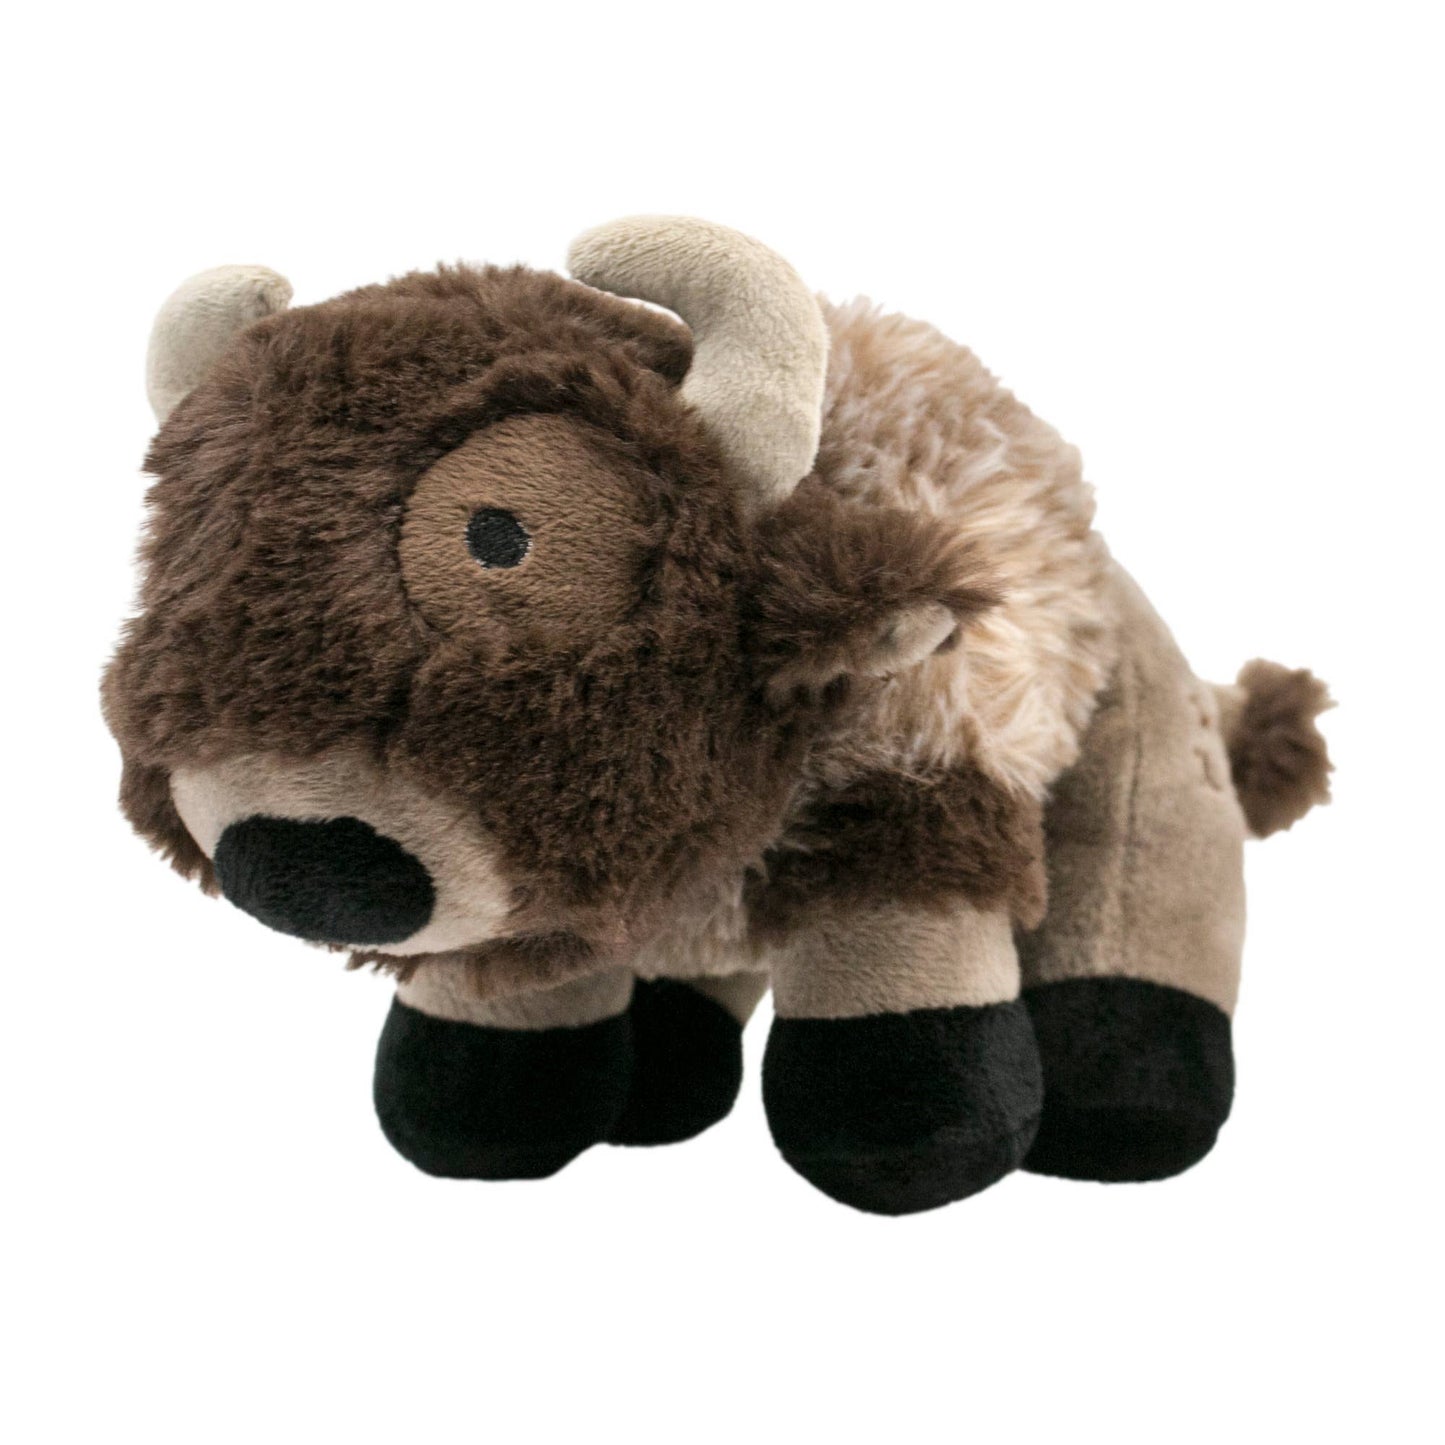 Tall Tails Plush Buffalo Squeaker Toy 9"